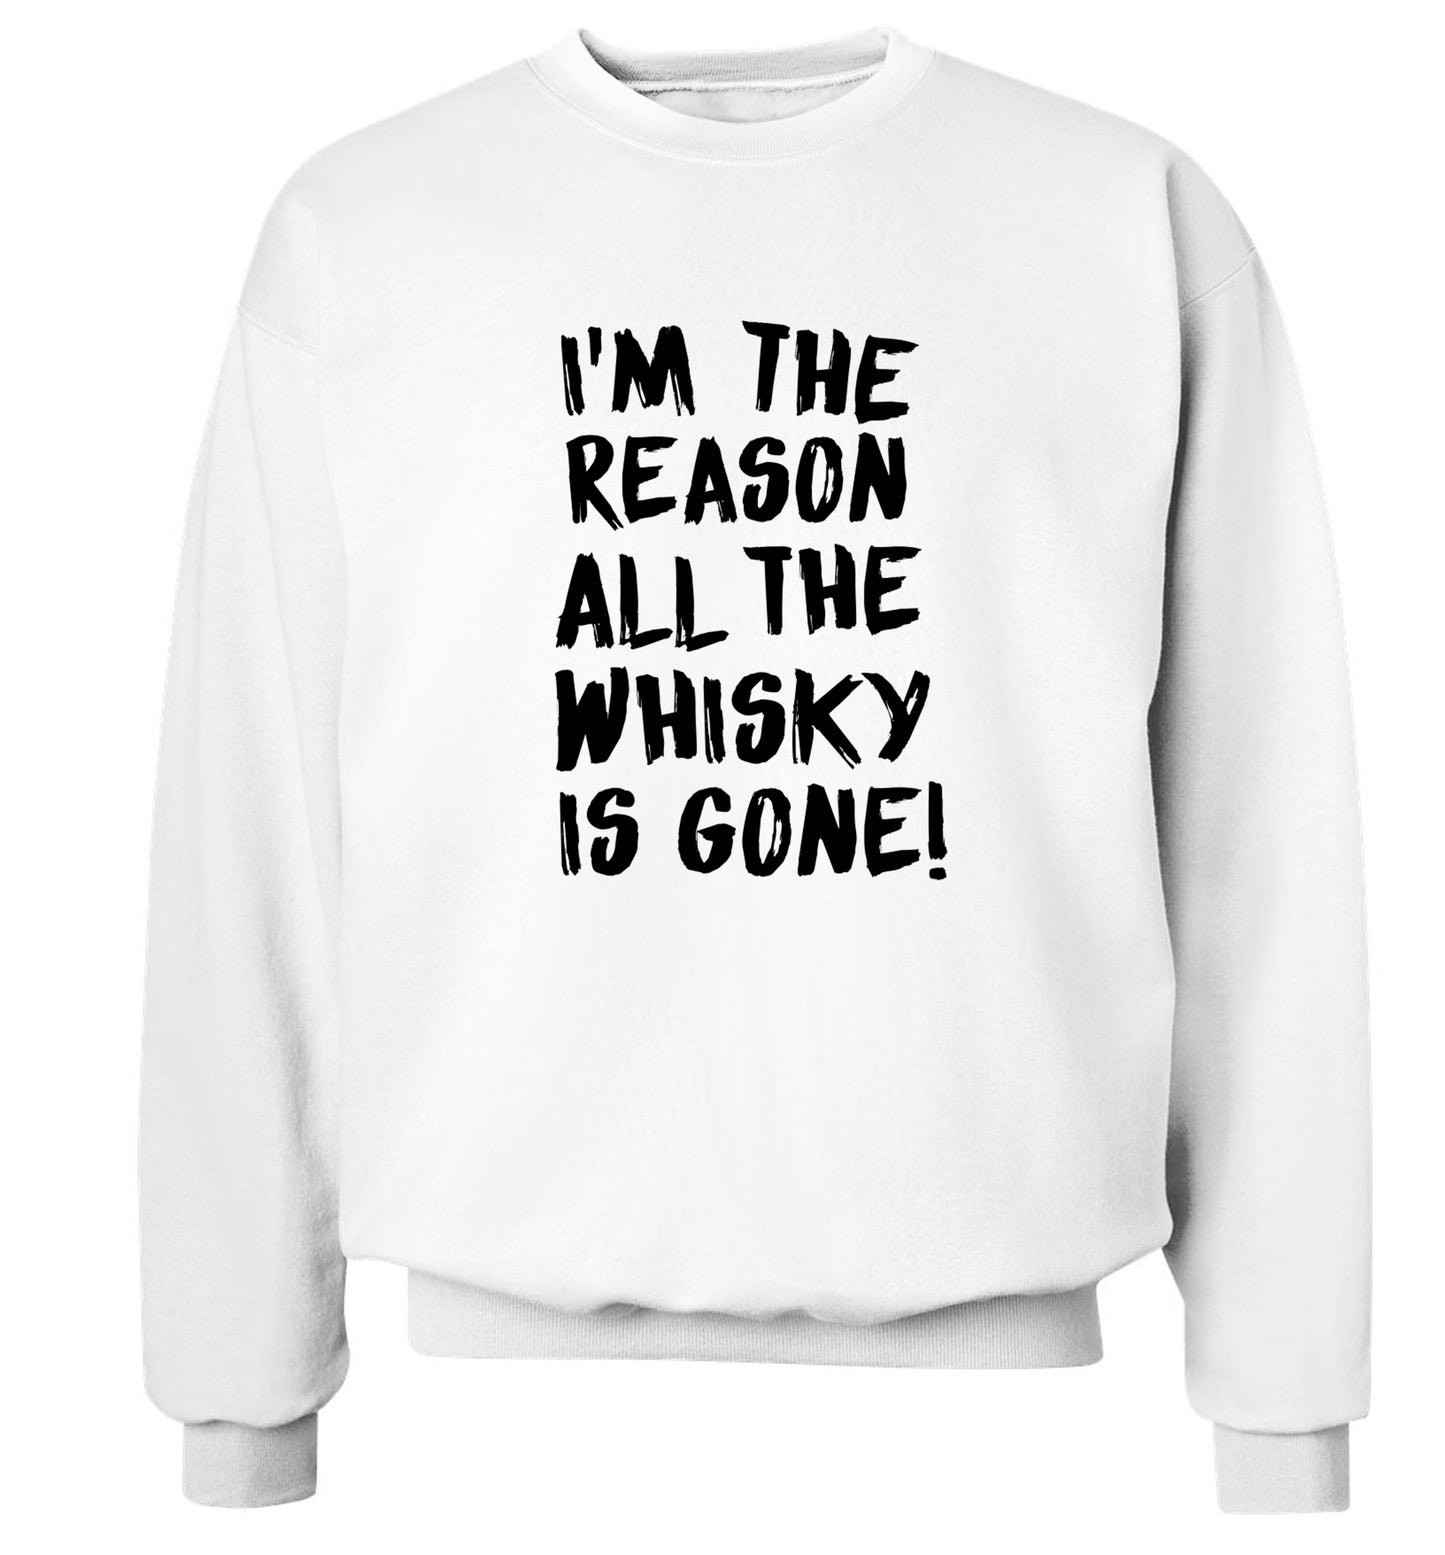 I'm the reason all the whisky is gone Adult's unisex white Sweater 2XL